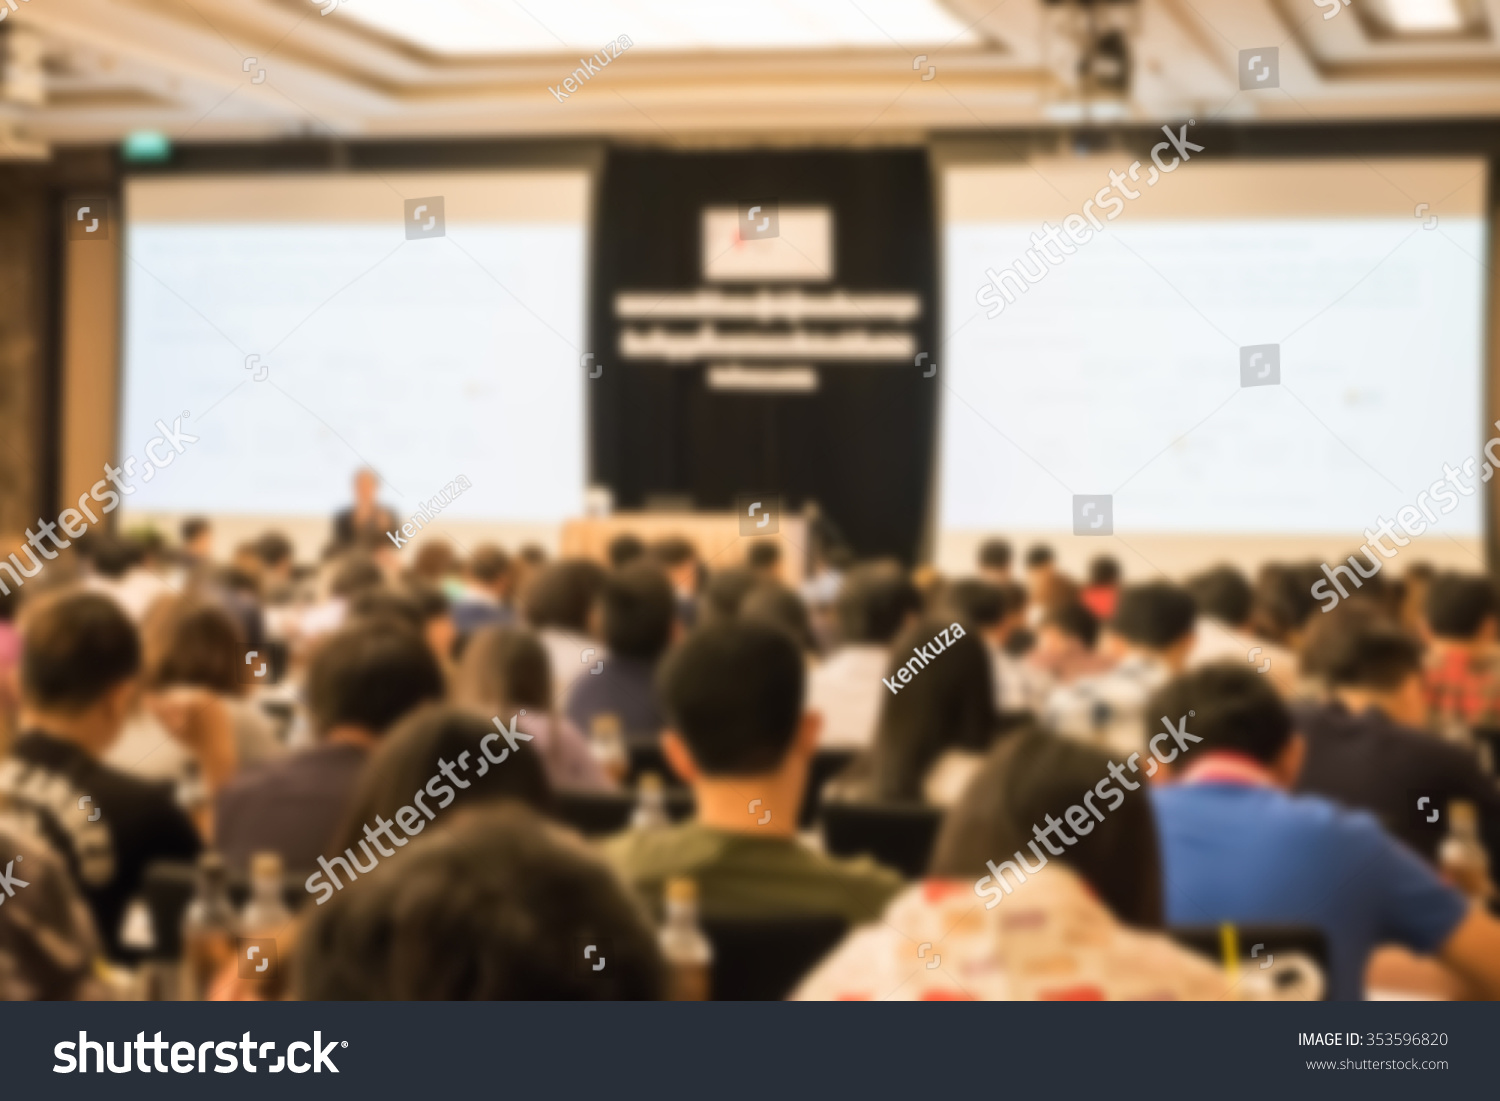 Motion blur of view of seminar with audience in a seminar room #353596820